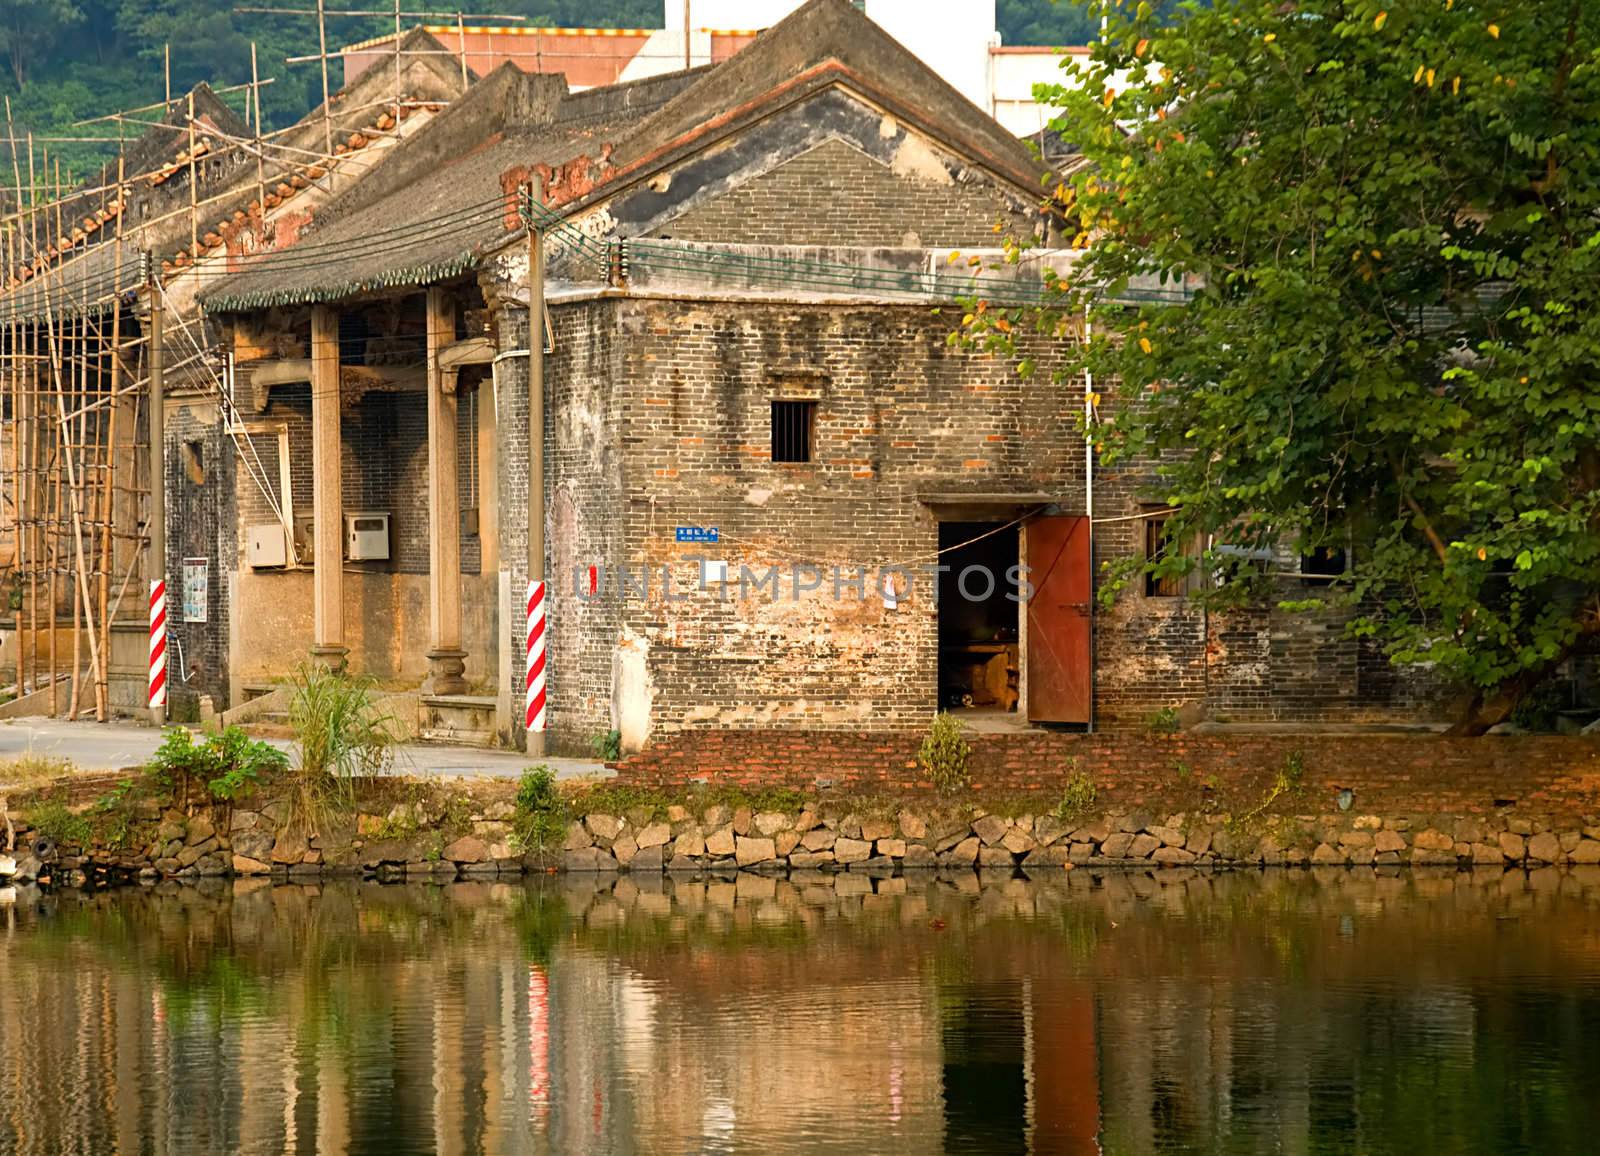 The old house construction in a village of China, with reflection over lake